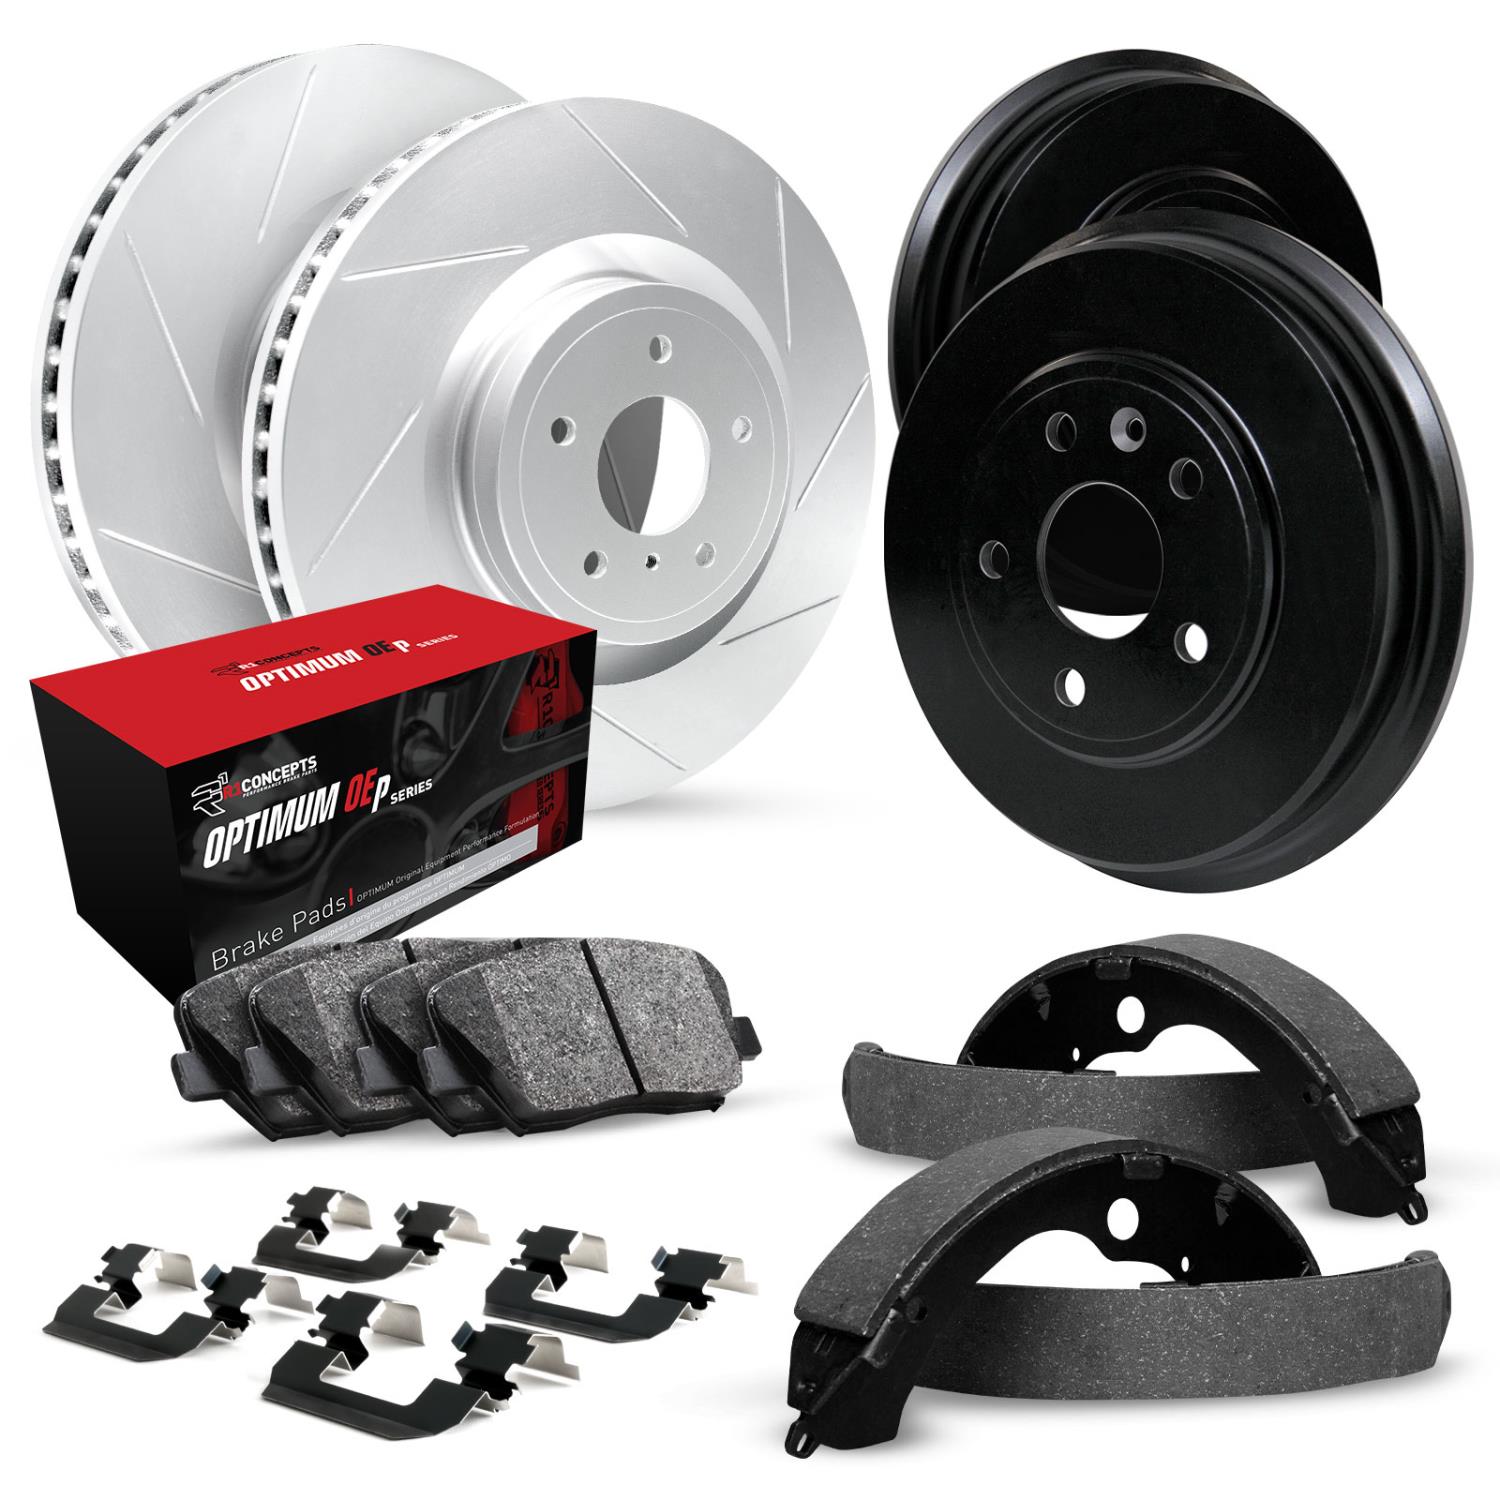 GEO-Carbon Slotted Brake Rotor & Drum Set w/Optimum OE Pads, Shoes, & Hardware, 1998-2003 GM, Position: Front & Rear